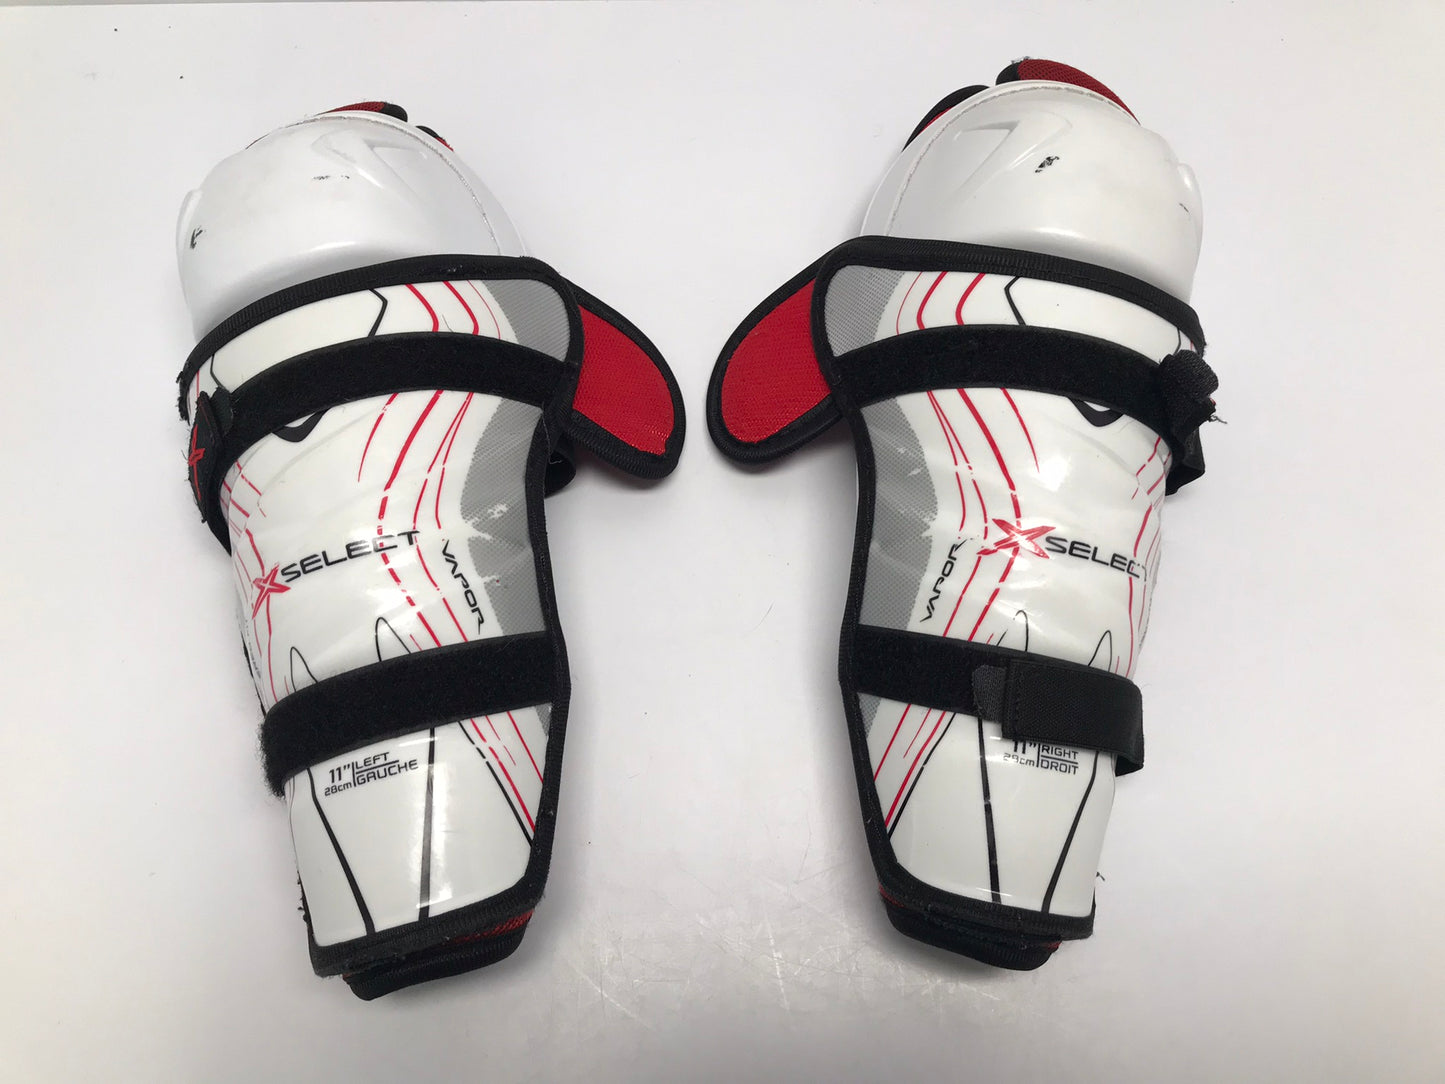 Hockey Shin Pads Child Size 11 Inch Bauer Vapor X Select White Red Black Excellent